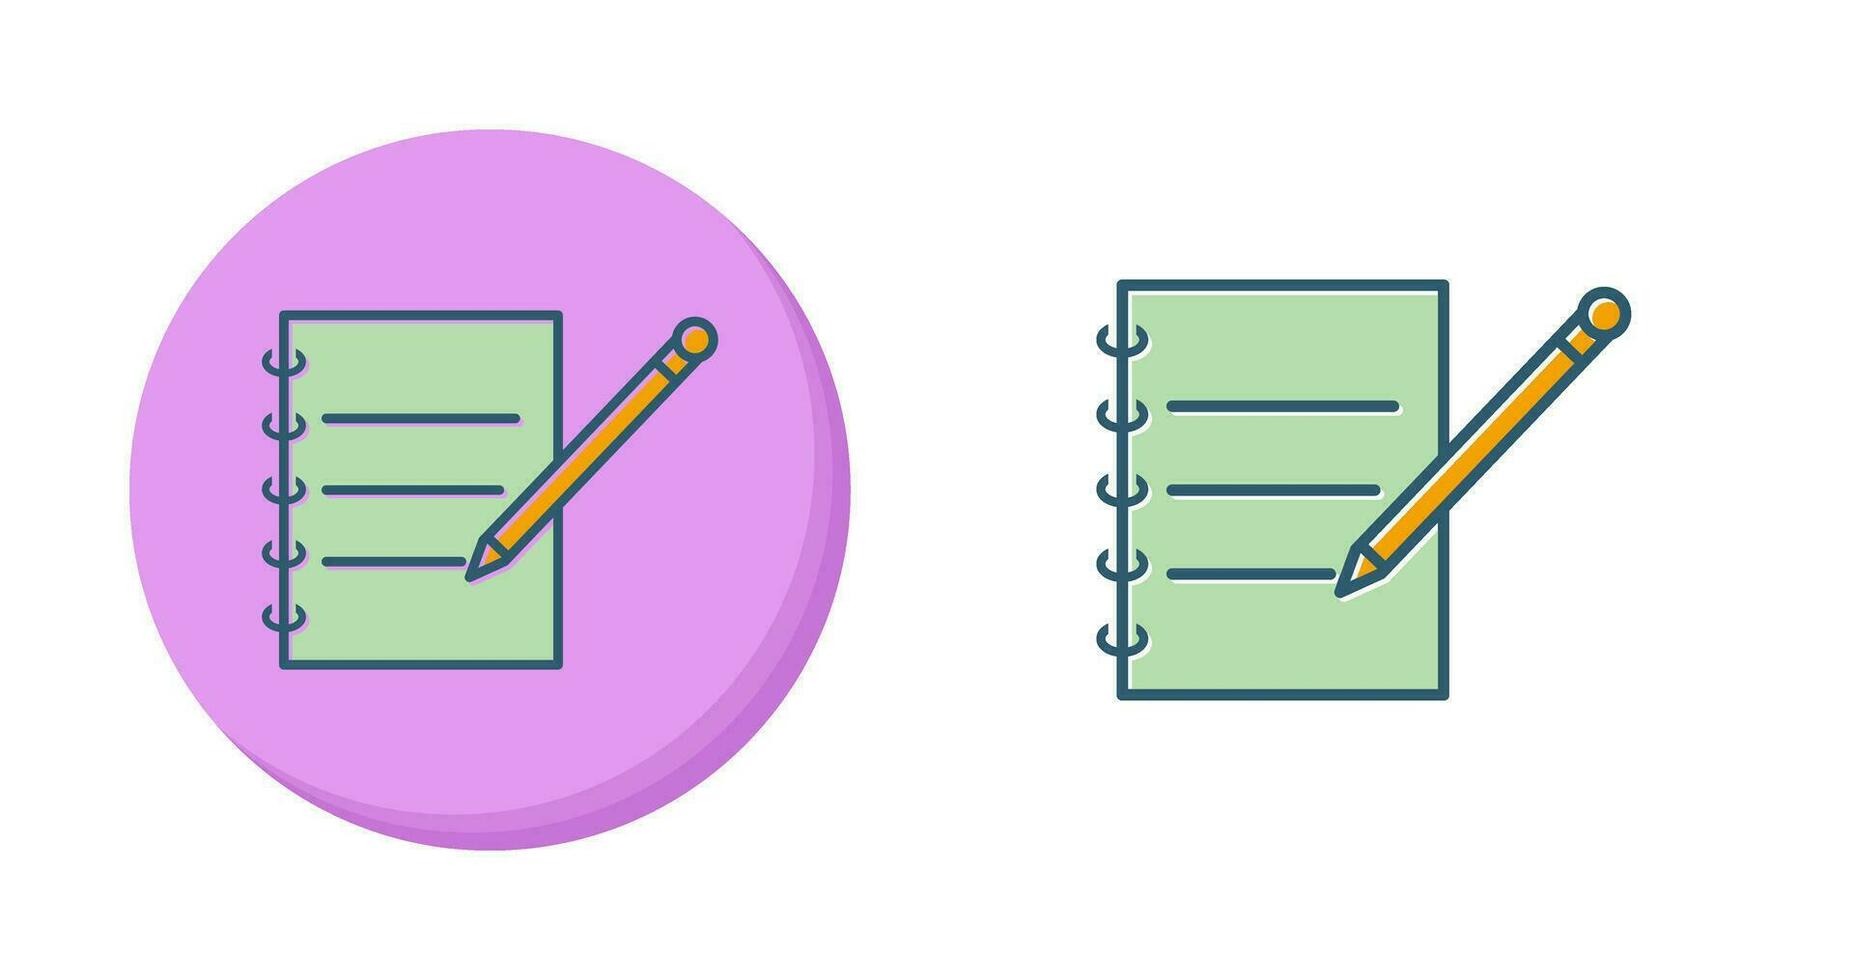 Notebook and Pen Vector Icon